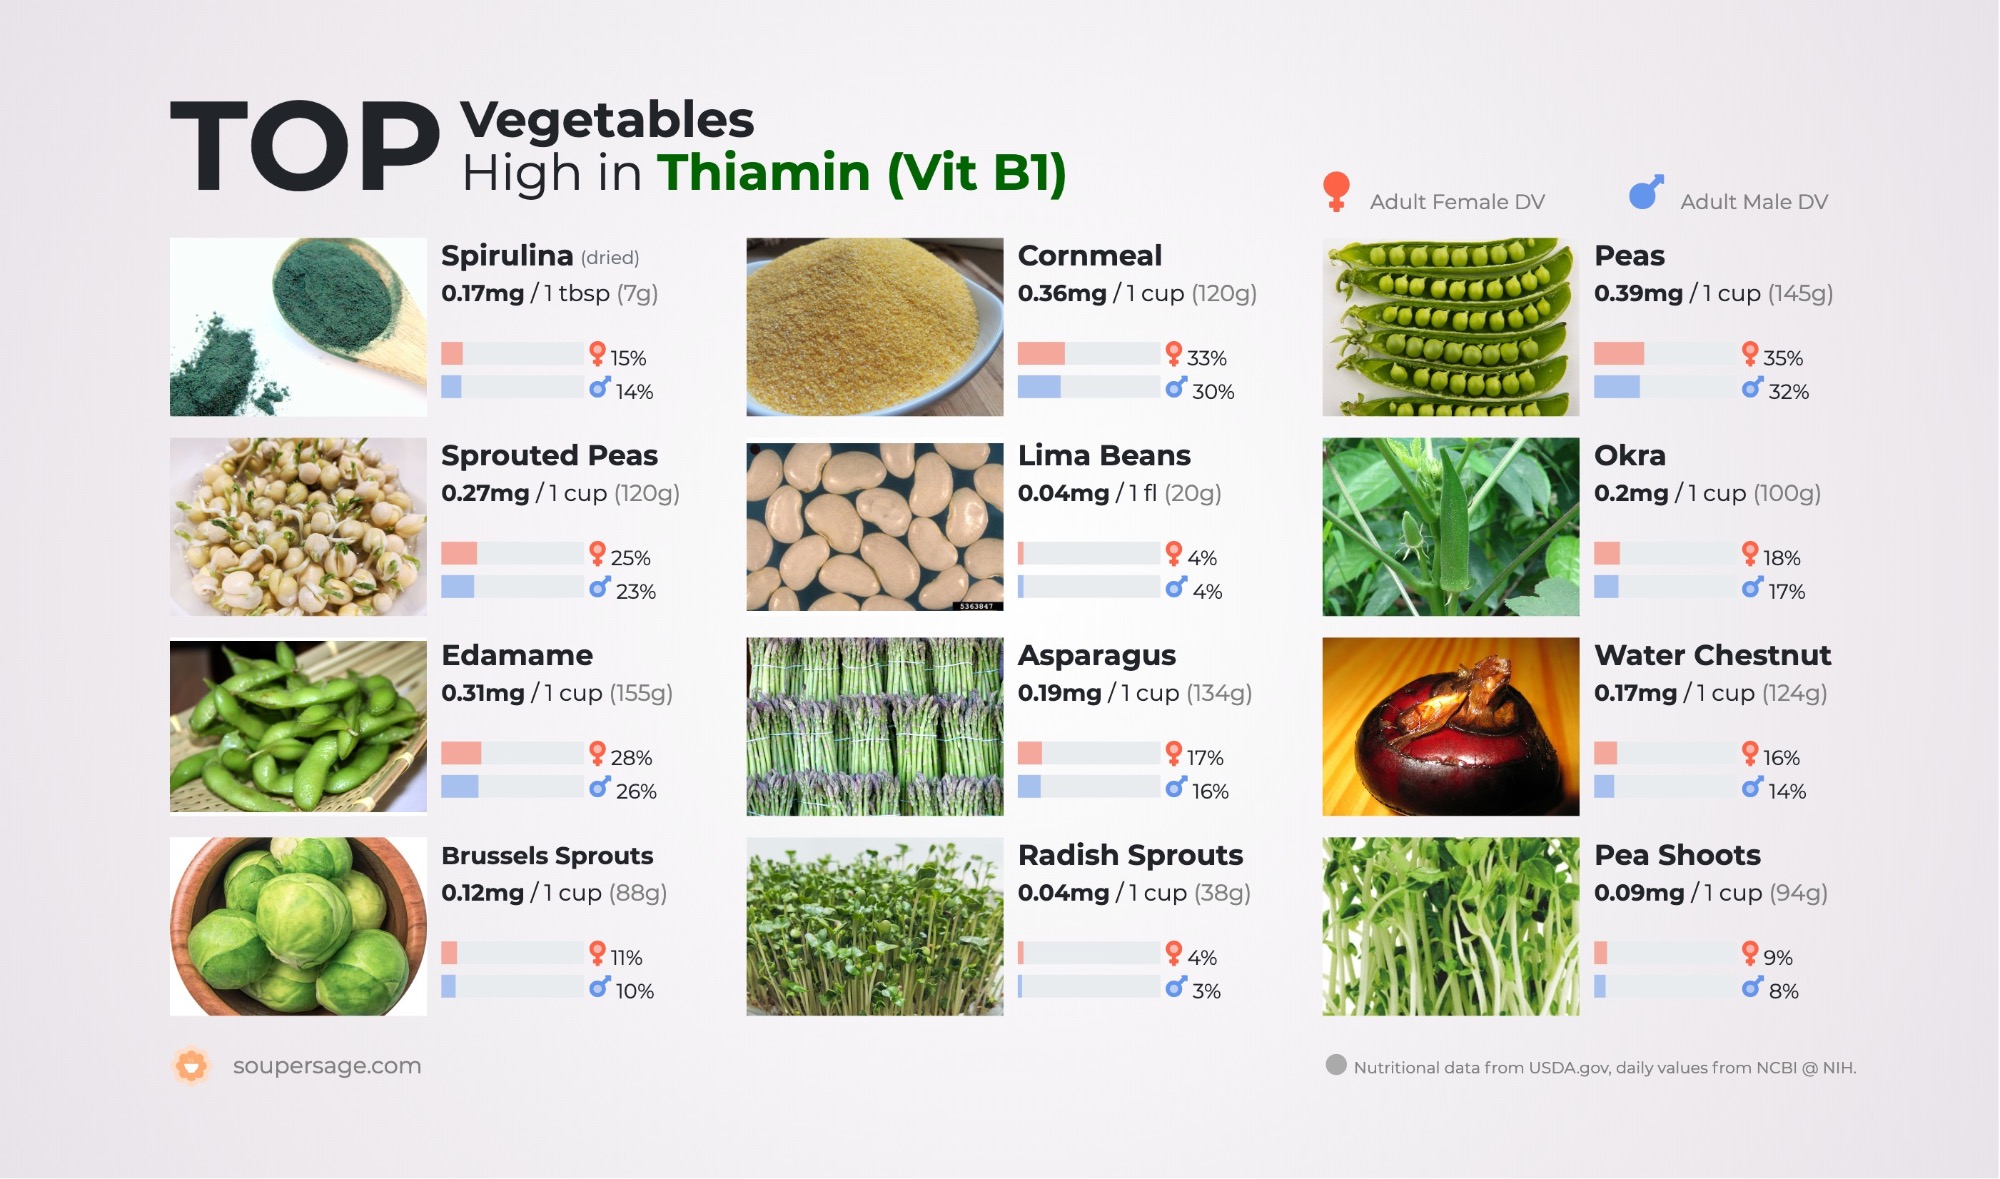 image of Top Vegetables High in Thiamin (Vit B1)